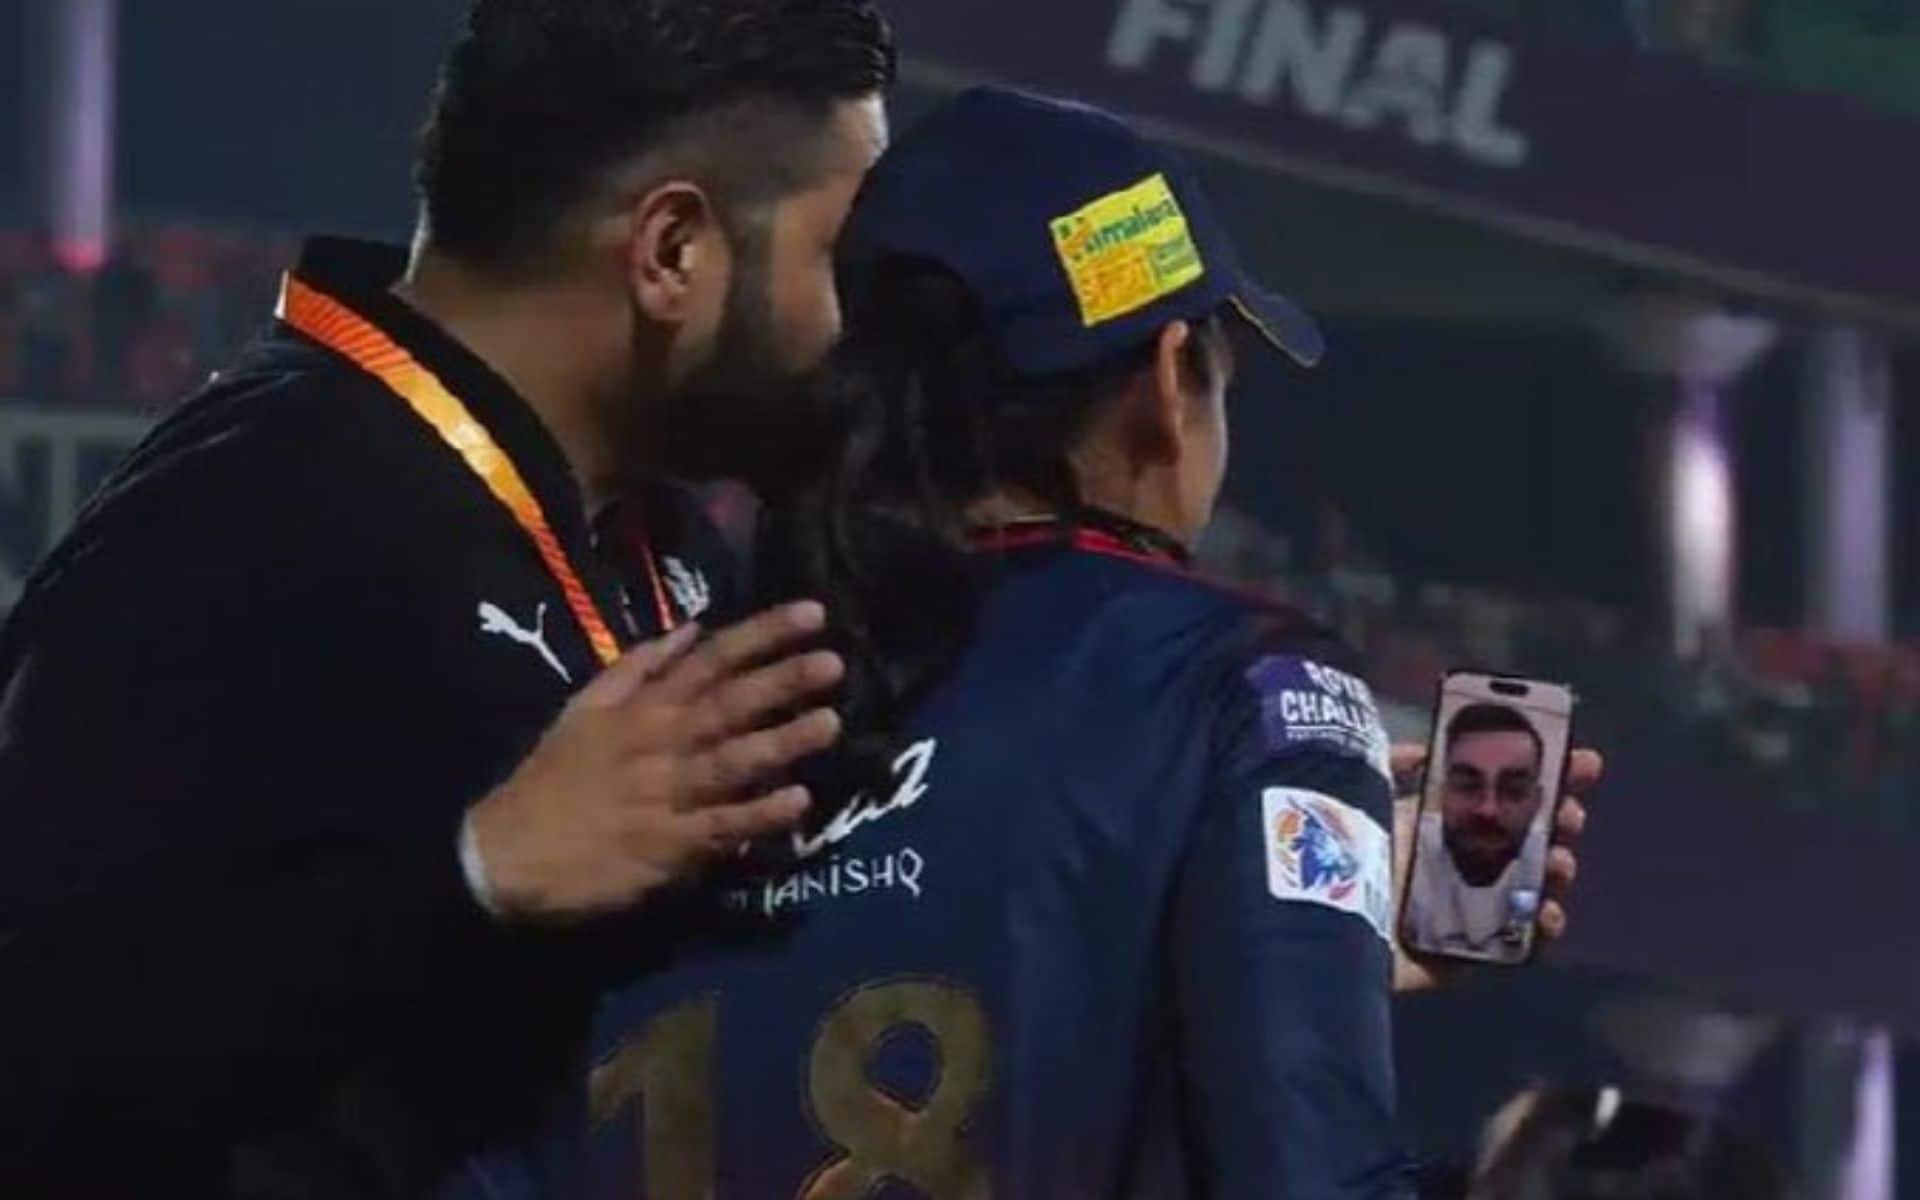 Kohli was one of the first to congratulate the RCB women's team [X.com]